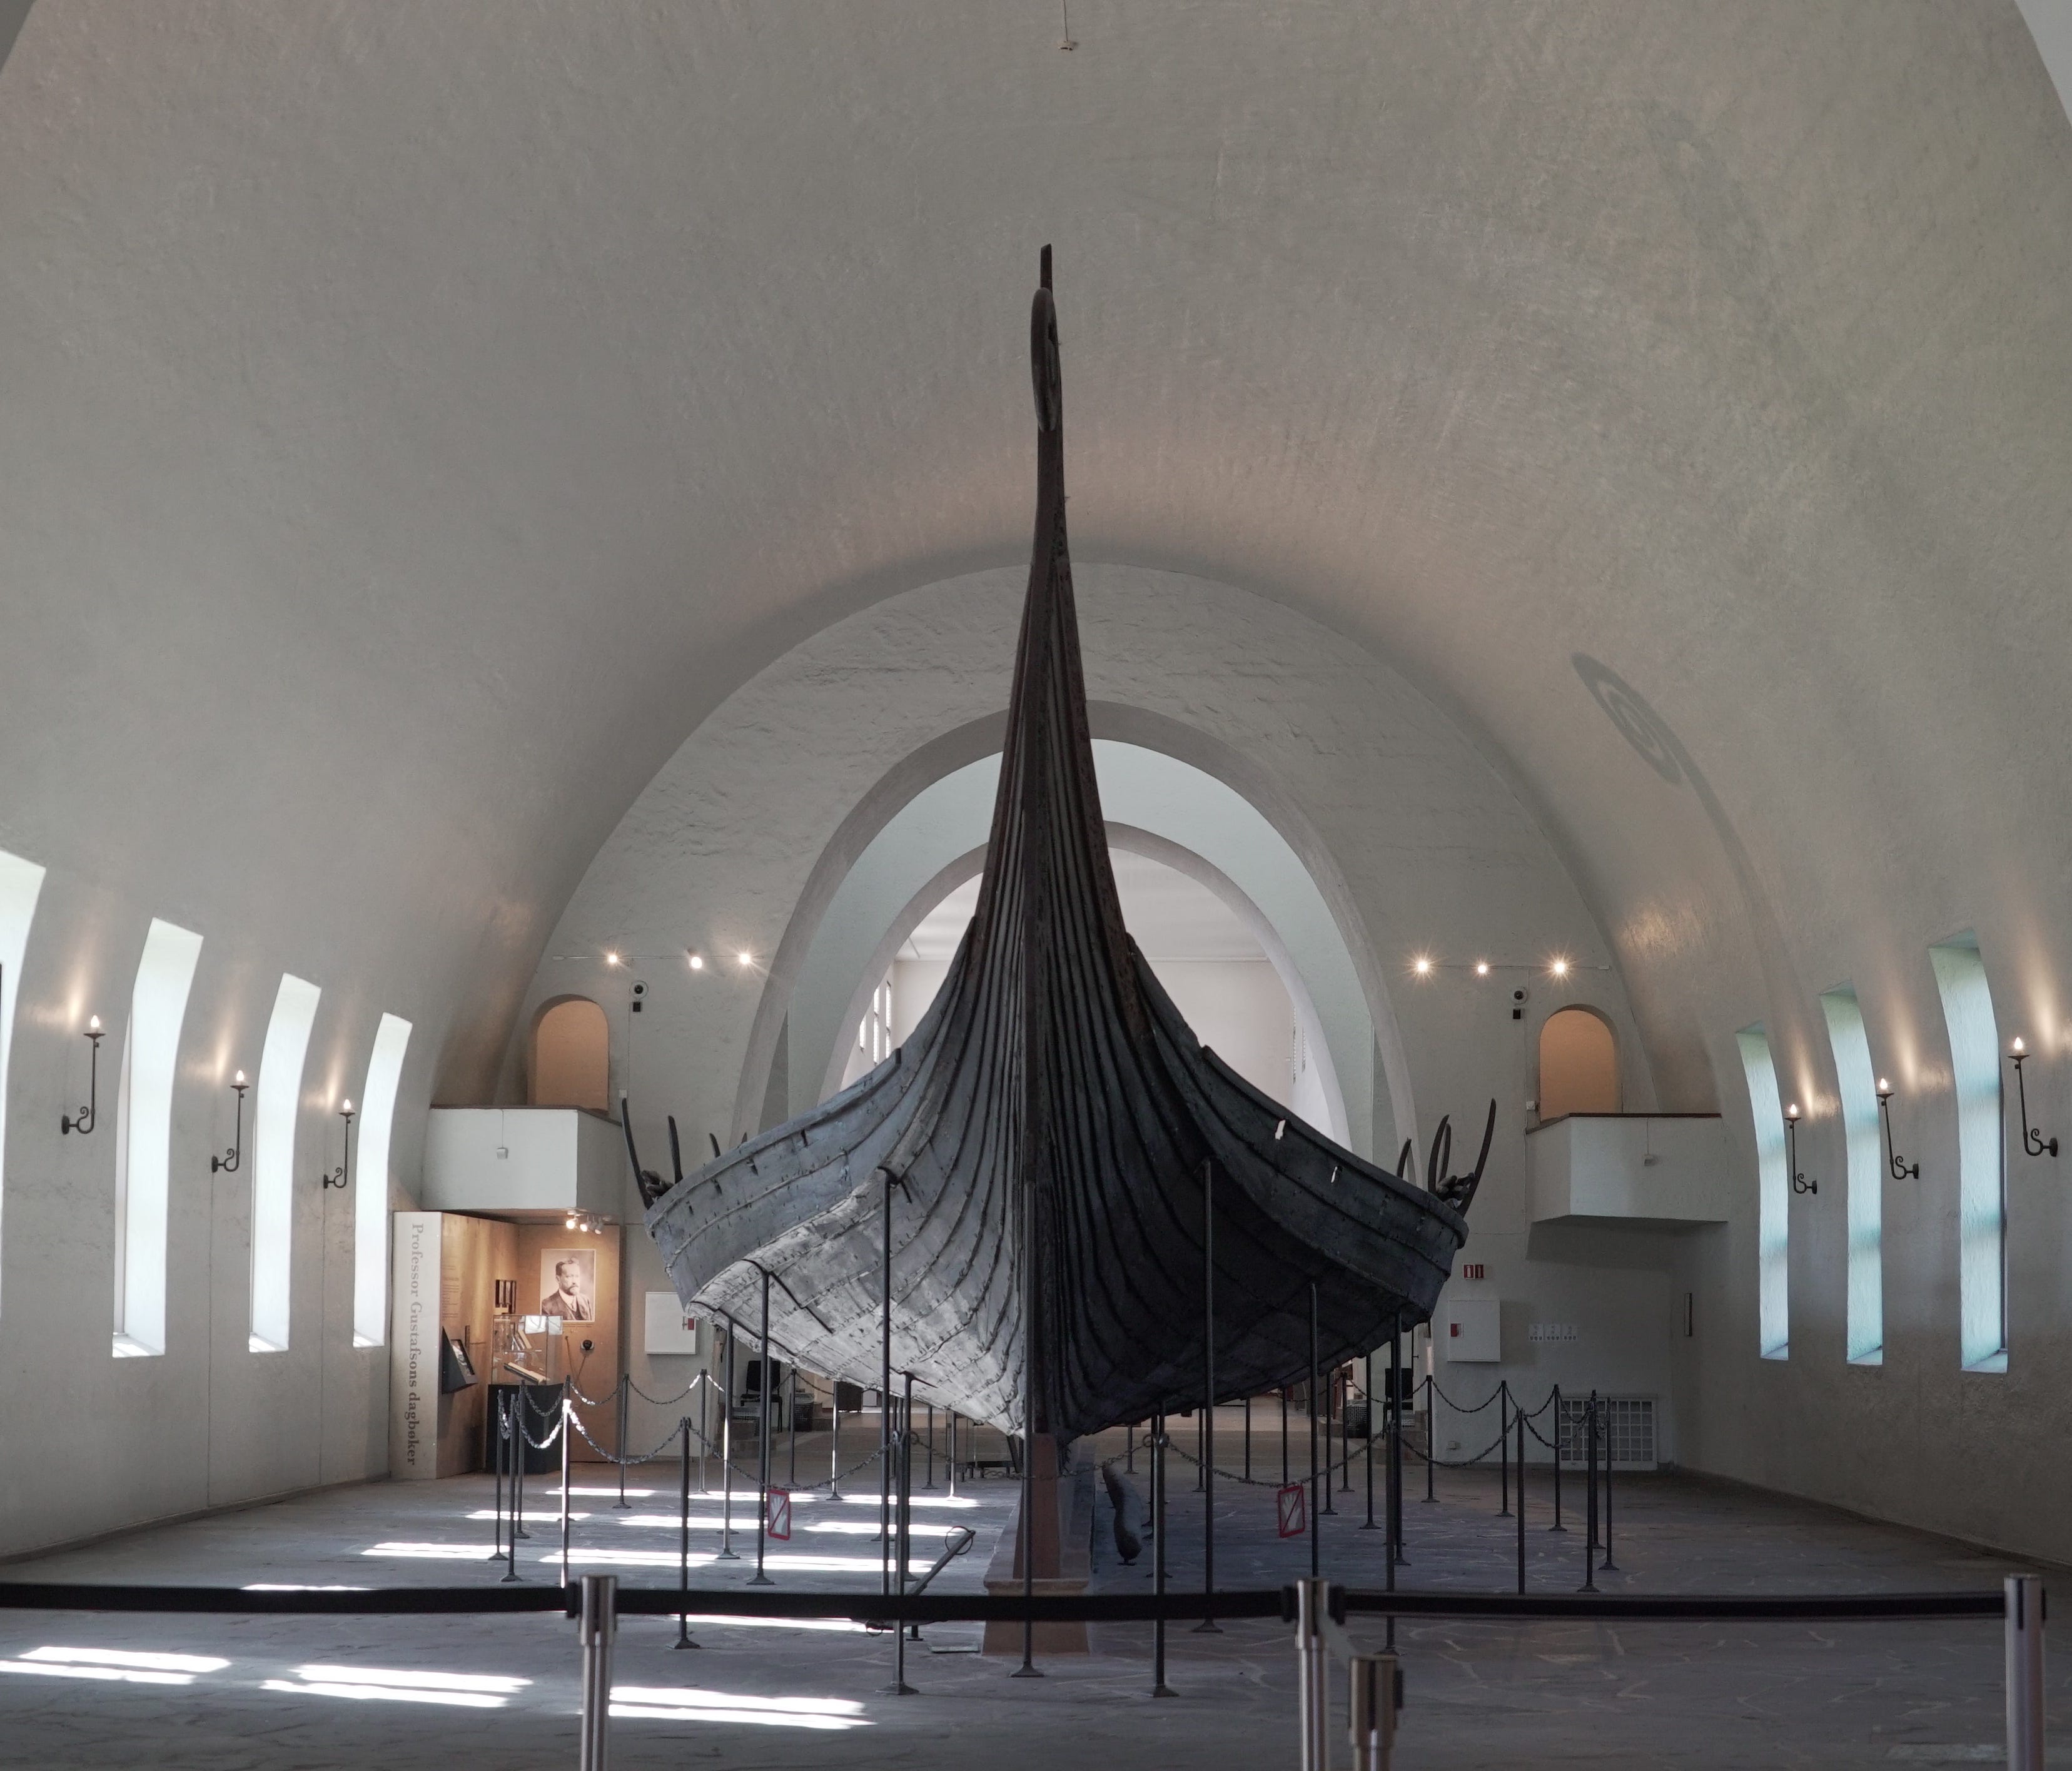 The Oseberg Viking ship was discovered in 1904, when a Norwegian farmer was digging on his land. Historians date the ship to pre-800 AD.